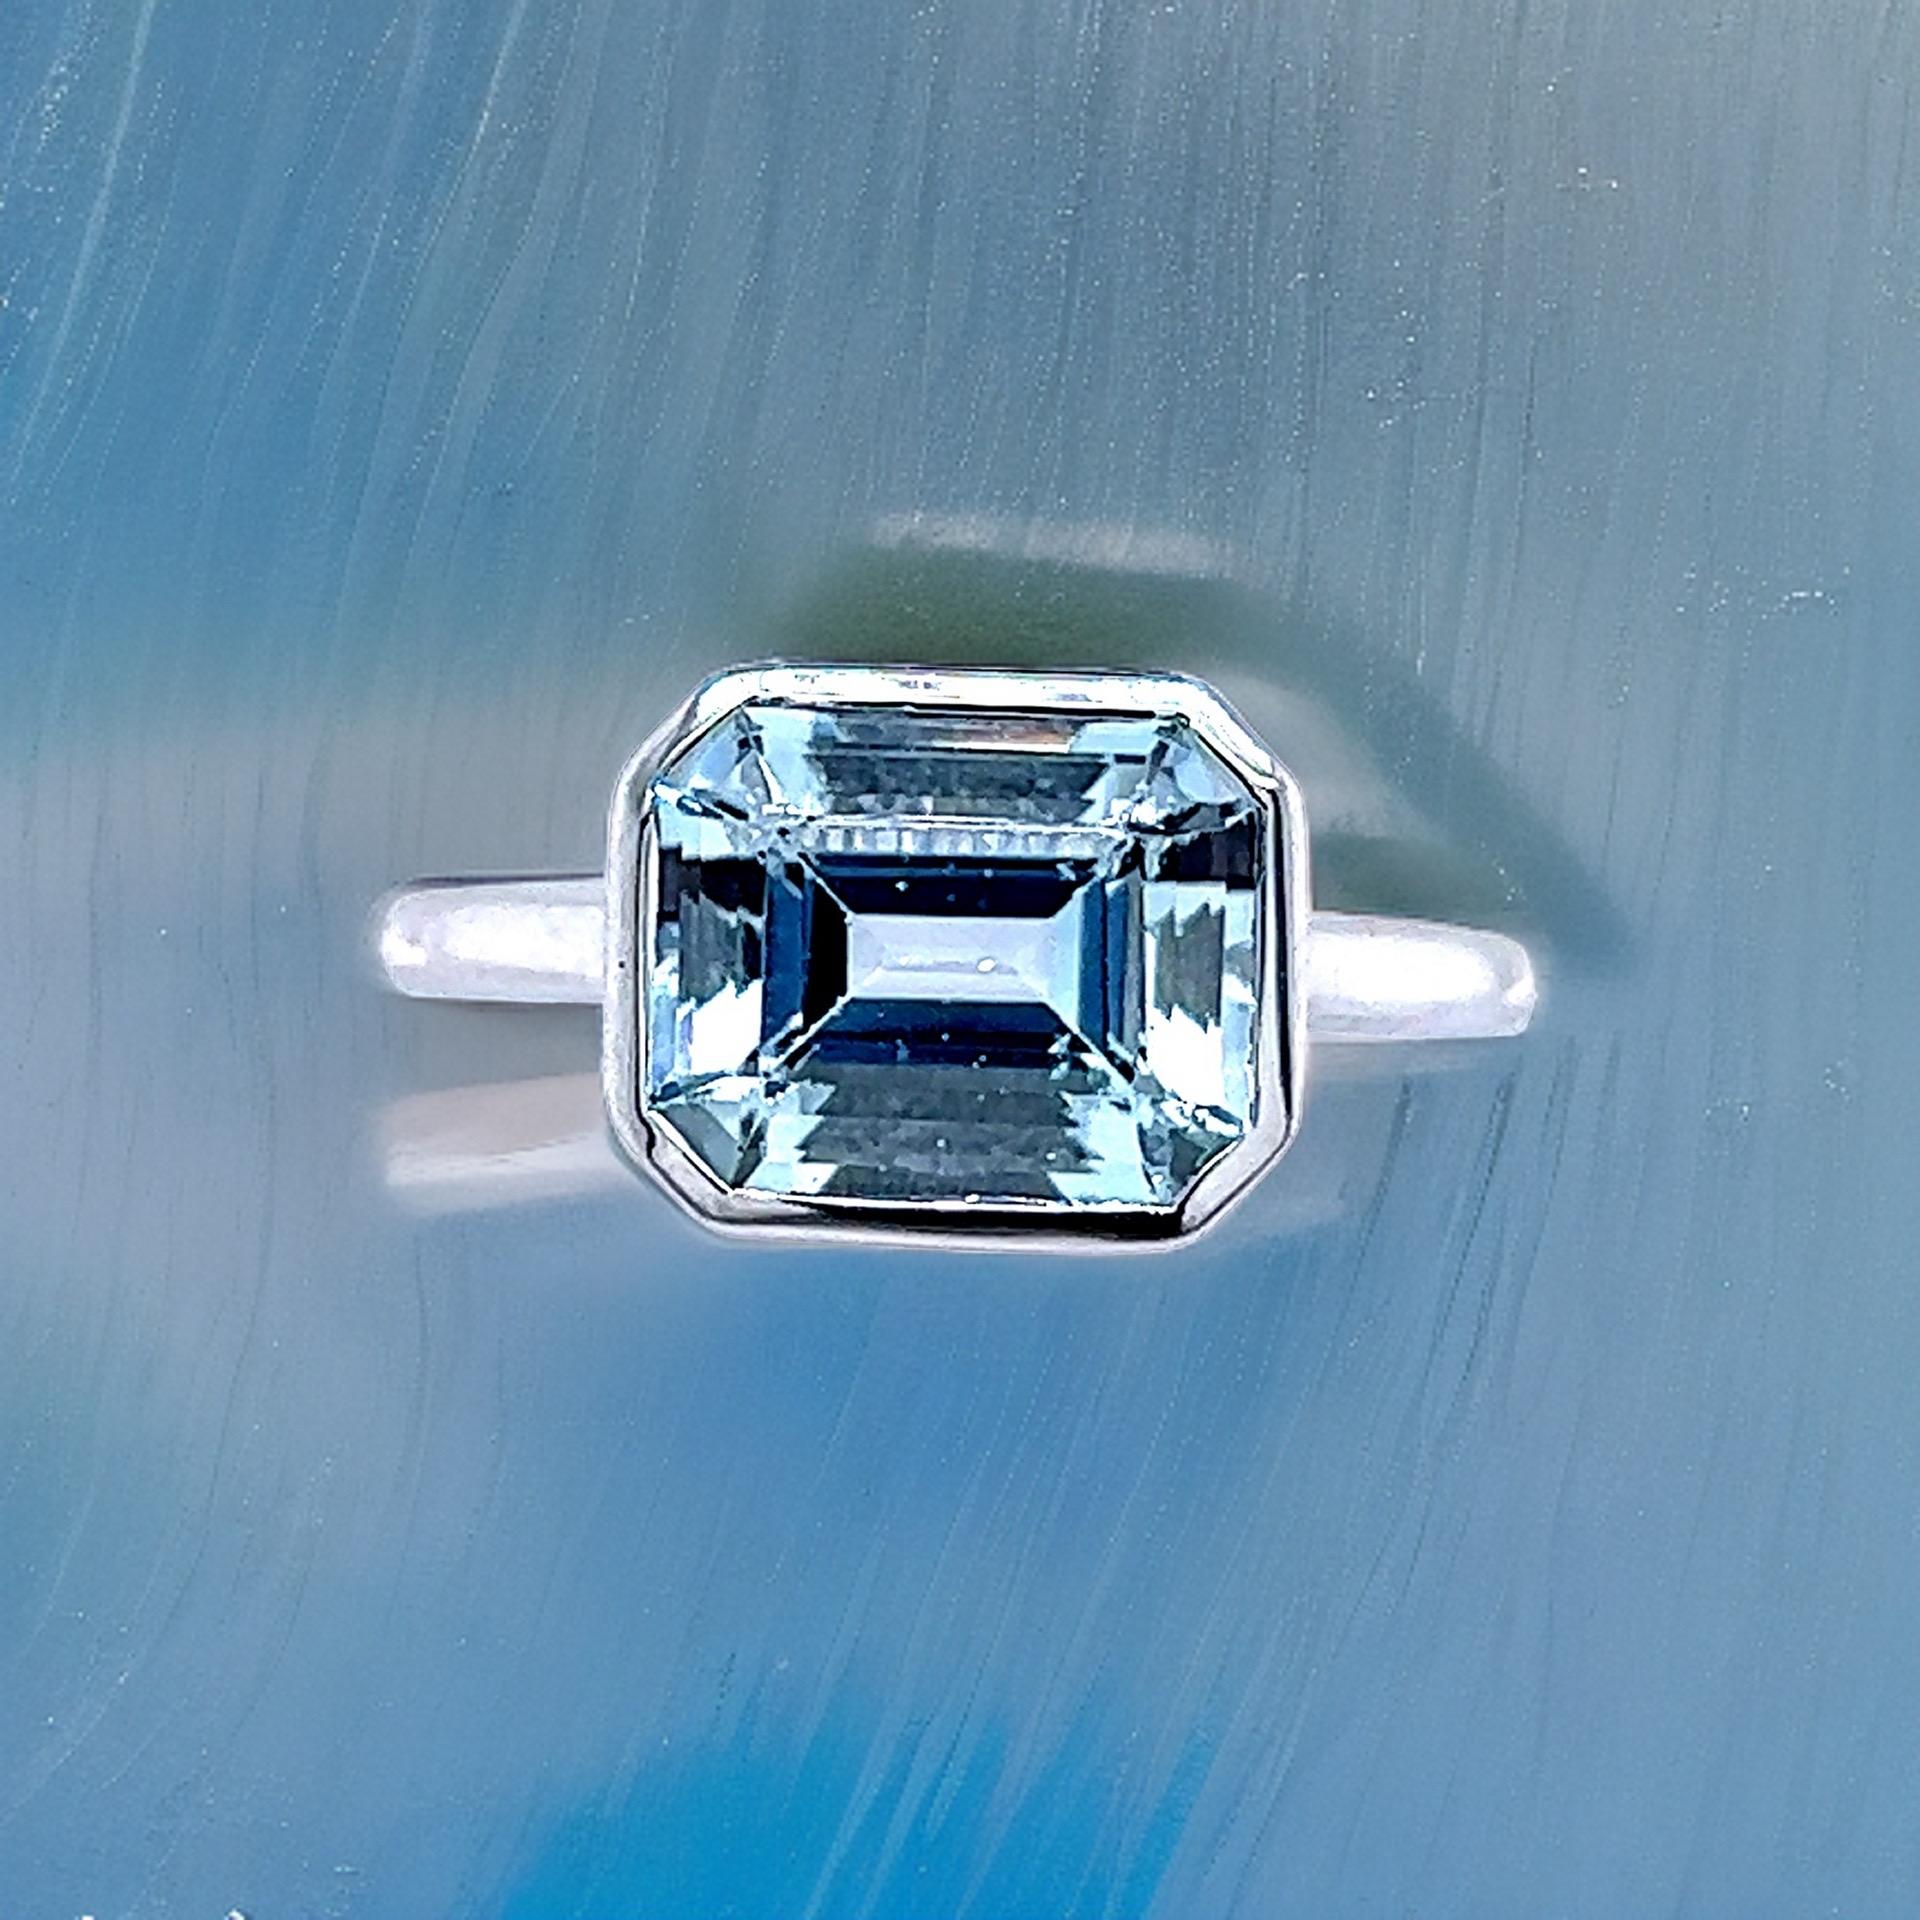 Natural Aquamarine Ring 6.5 14k White Gold 3.21 TCW Certified For Sale 5